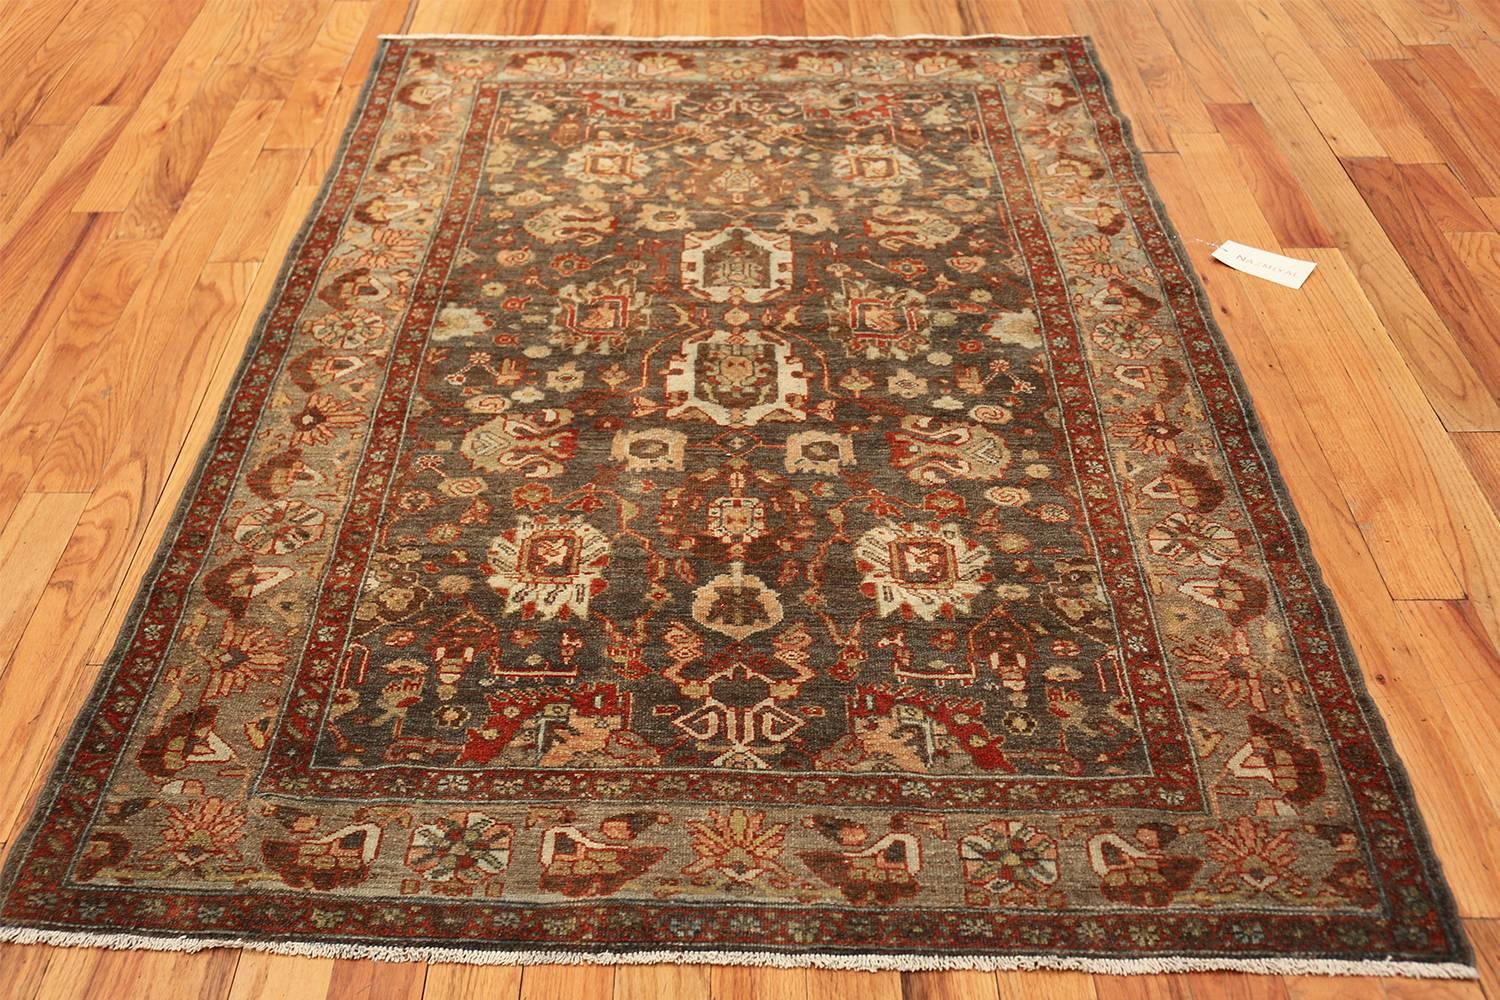 Beautiful Small Scatter Size Grey Antique Persian Malayer Rug, Country of Origin / Rug Type: Persian Rug, Circa Date: 1920. Size: 4 ft 4 in x 6 ft 5 in (1.32 m x 1.96 m).